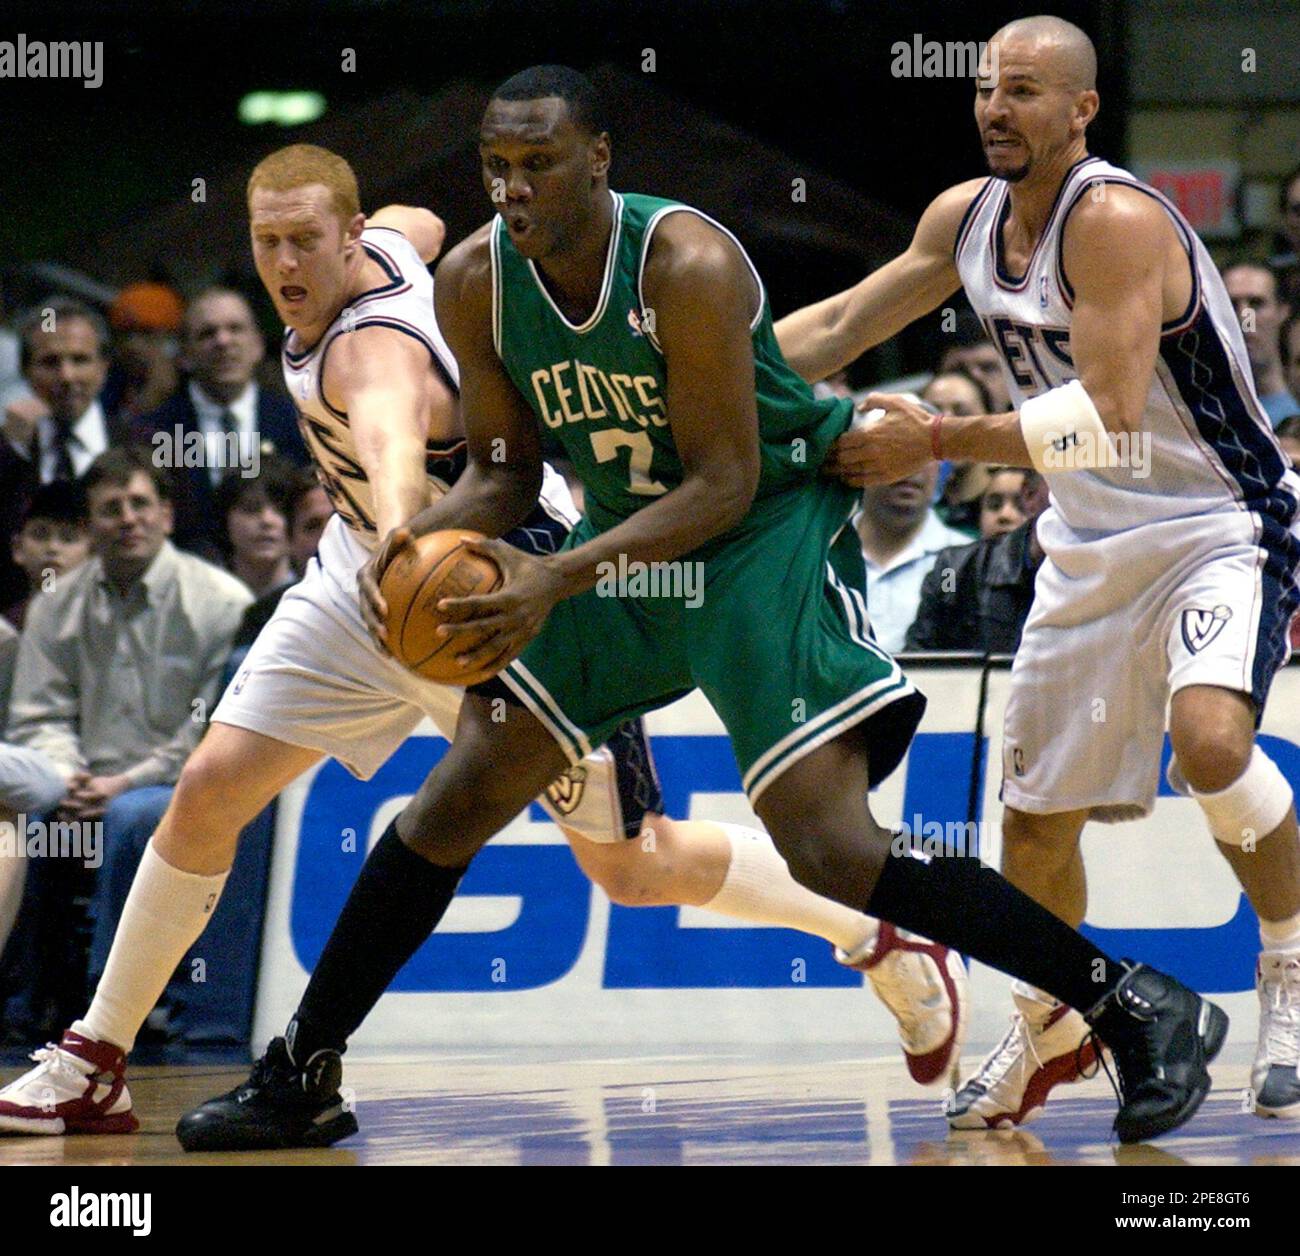 Boston Celtics' Al Jefferson (7) is pressured by New Jersey Nets' Brian  Scalabrine, left, and Jason Kidd during the first quarter Saturday, April  9, 2005 in East Rutherford, N.J. The Nets won